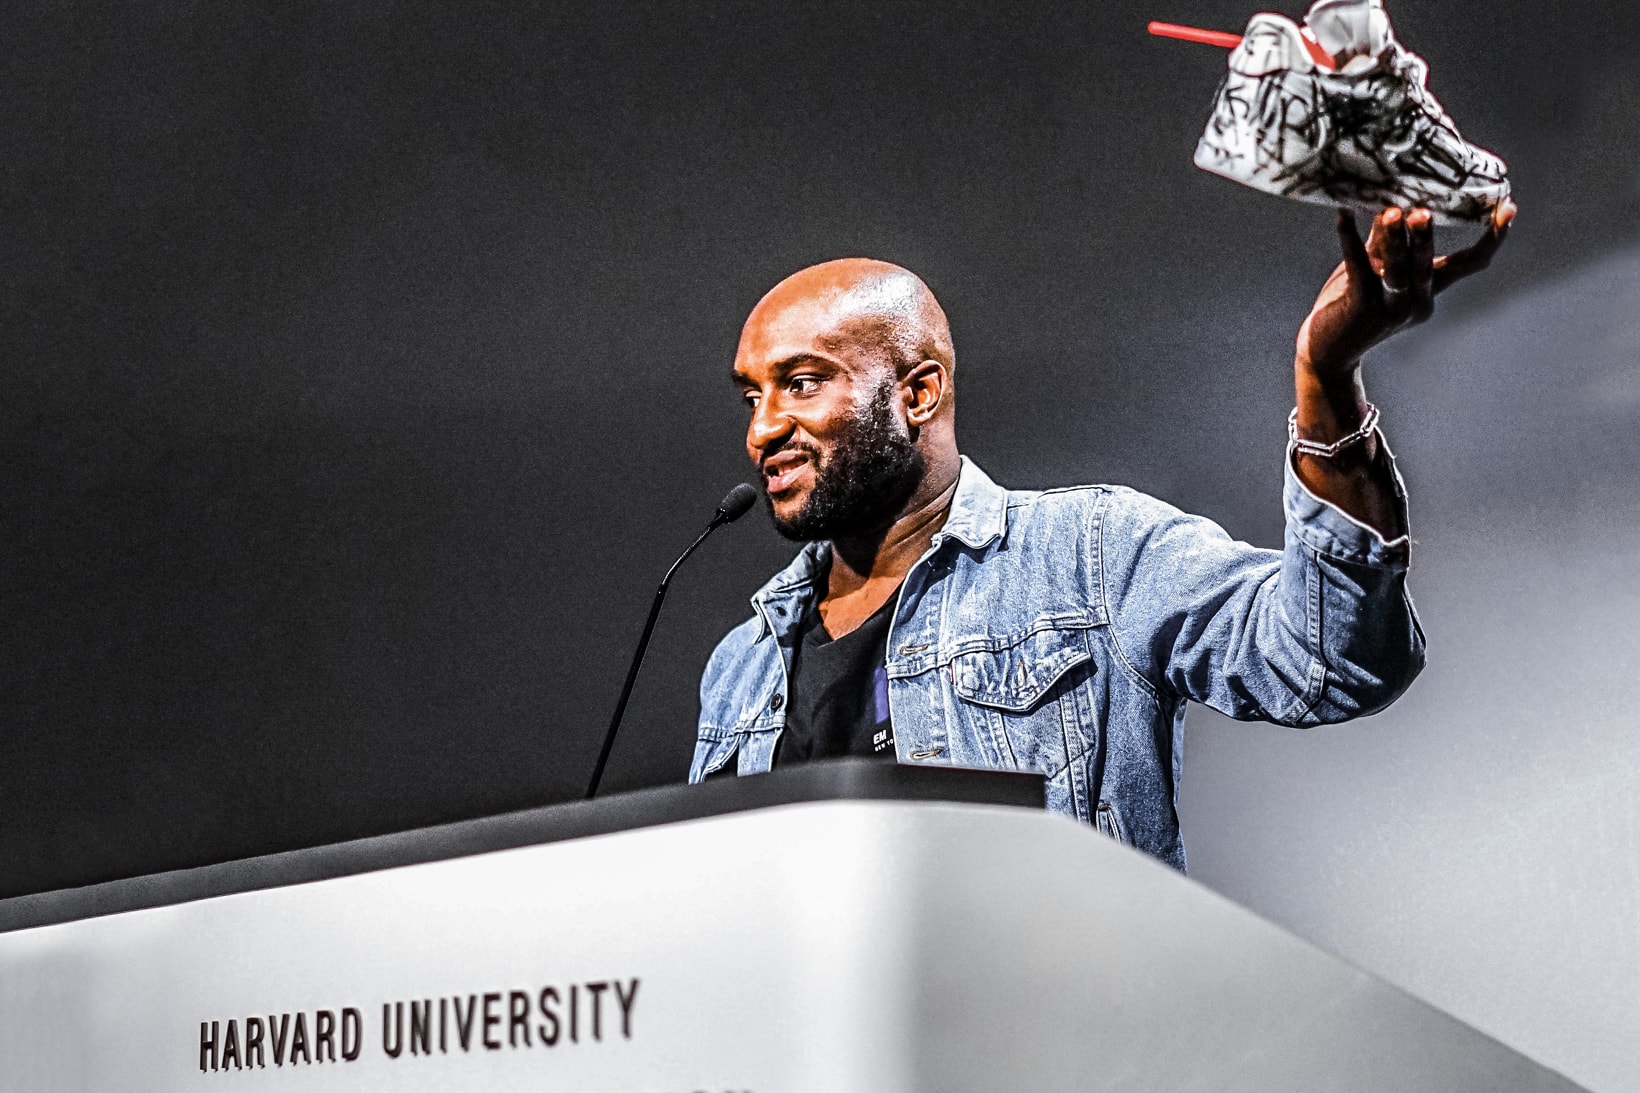 Personal Planning Language. In 2017, Virgil Abloh gave a lecture